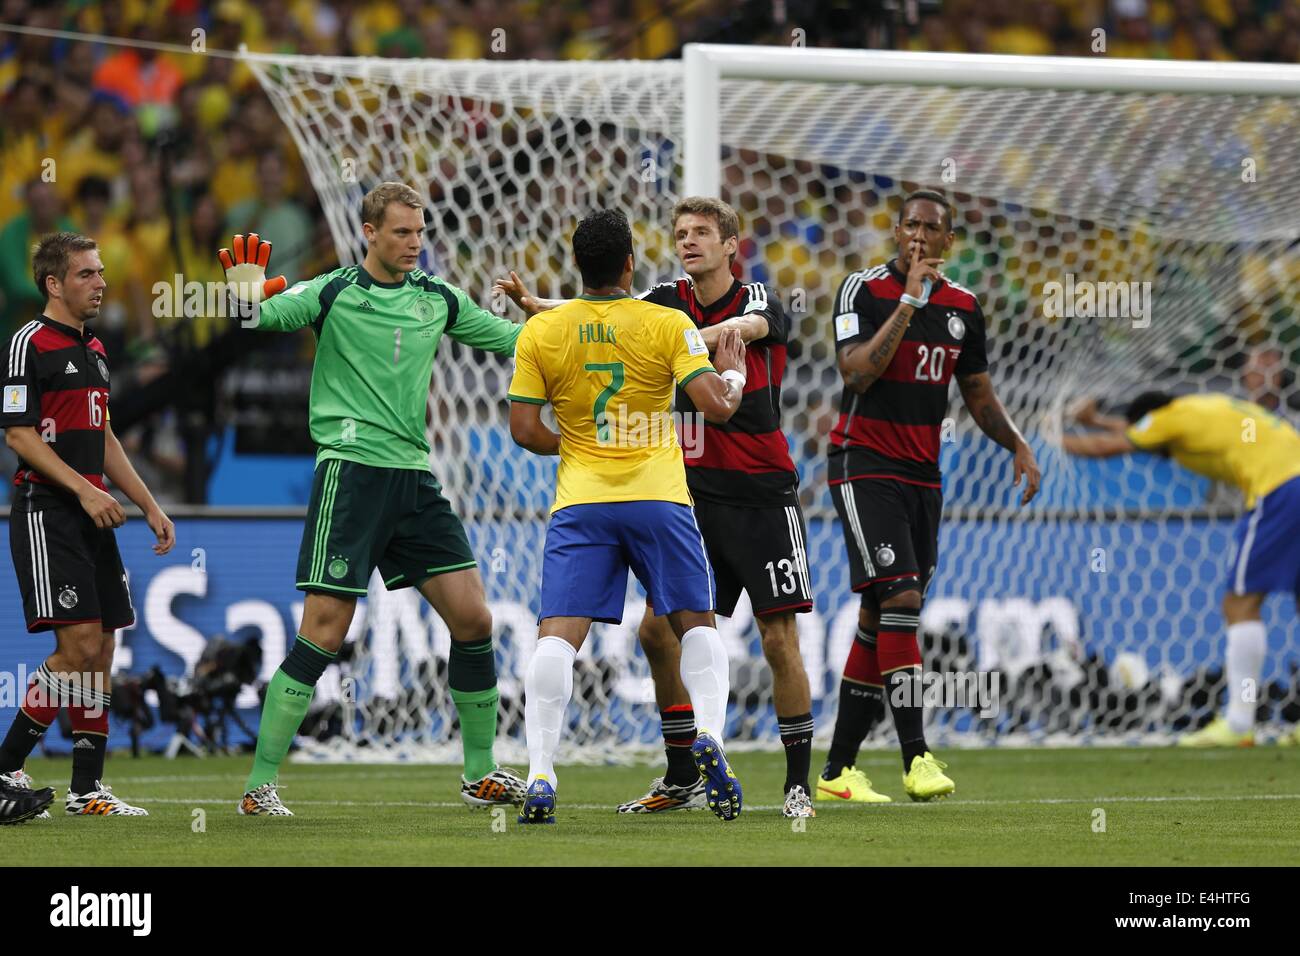 (L-R) Philipp Lahm, Manuel Neuer (GER), Hulk (BRA), Thomas Muller, Jerome Boateng (GER), JULY 8, 2014 - Football / Soccer : FIFA World Cup Brazil 2014 Semi Final match between Brazil and Germany at the Estadio Mineirao in Belo Horizonte, Brazil. (Photo by AFLO) [3604] Stock Photo